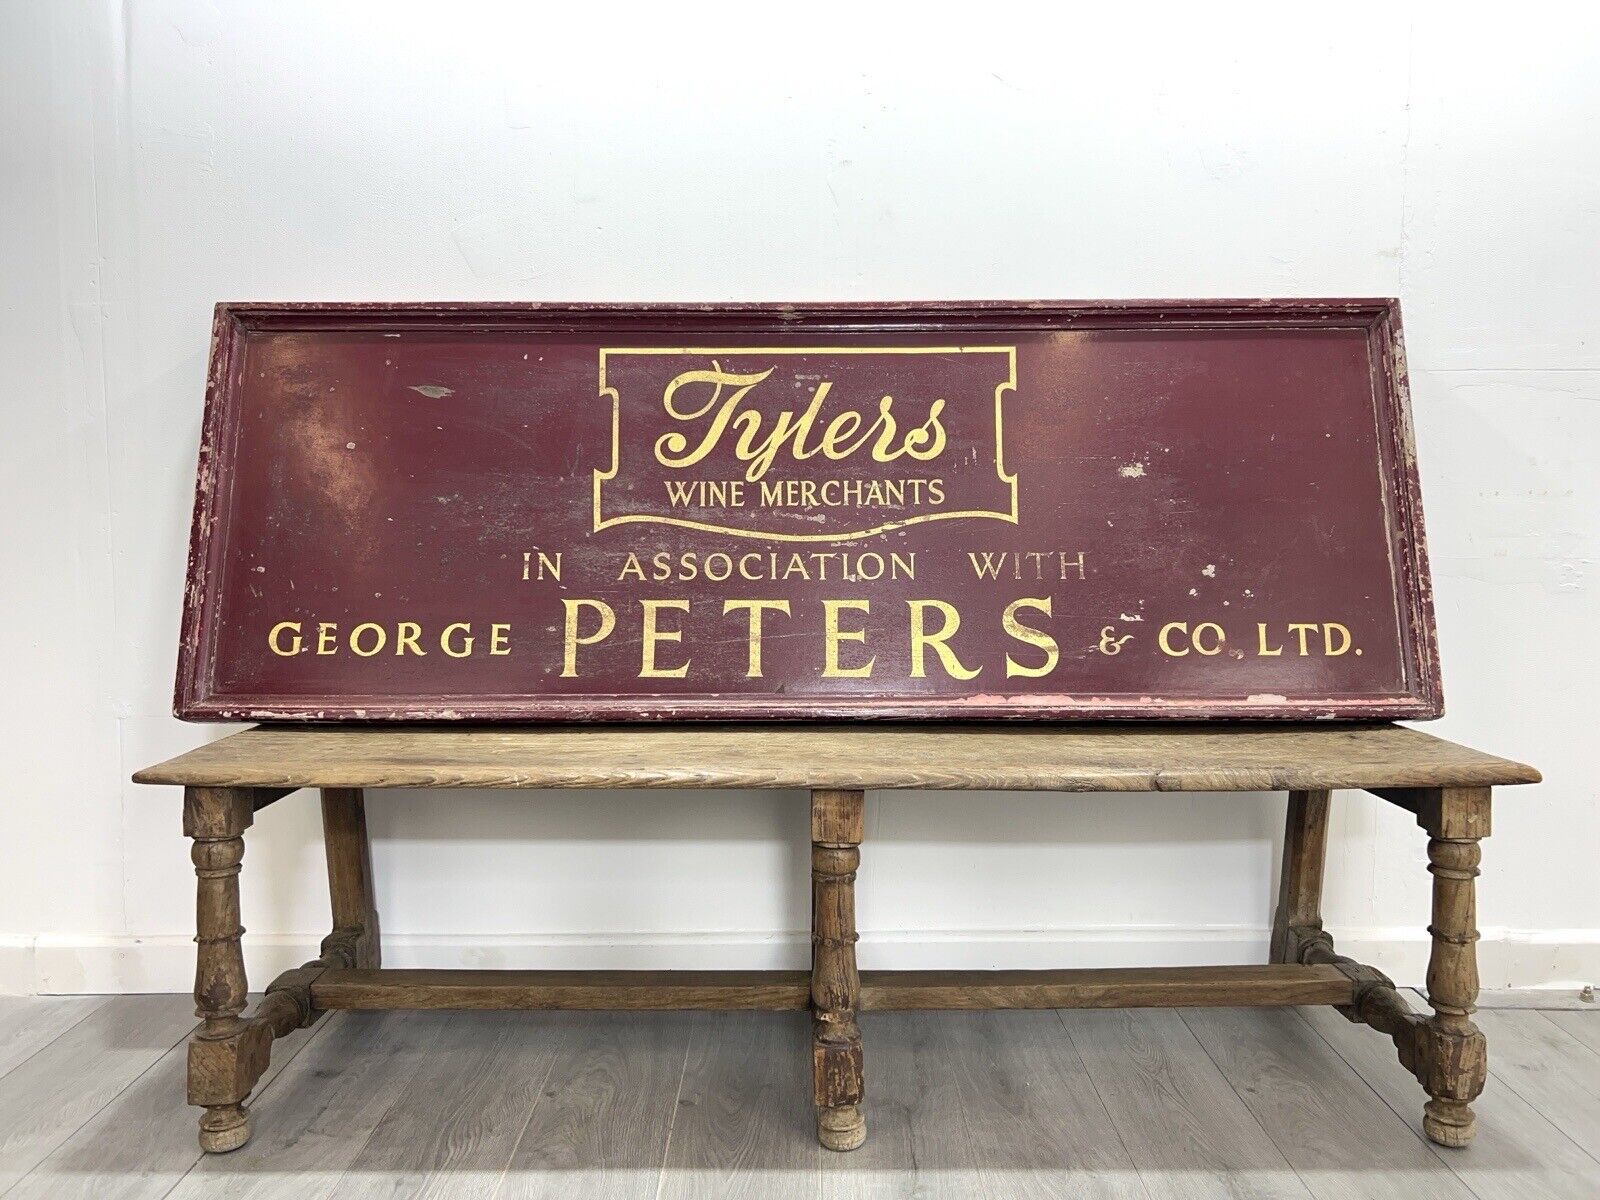 Early 20th Century, Painted Wooden Wine Merchants Shop Sign